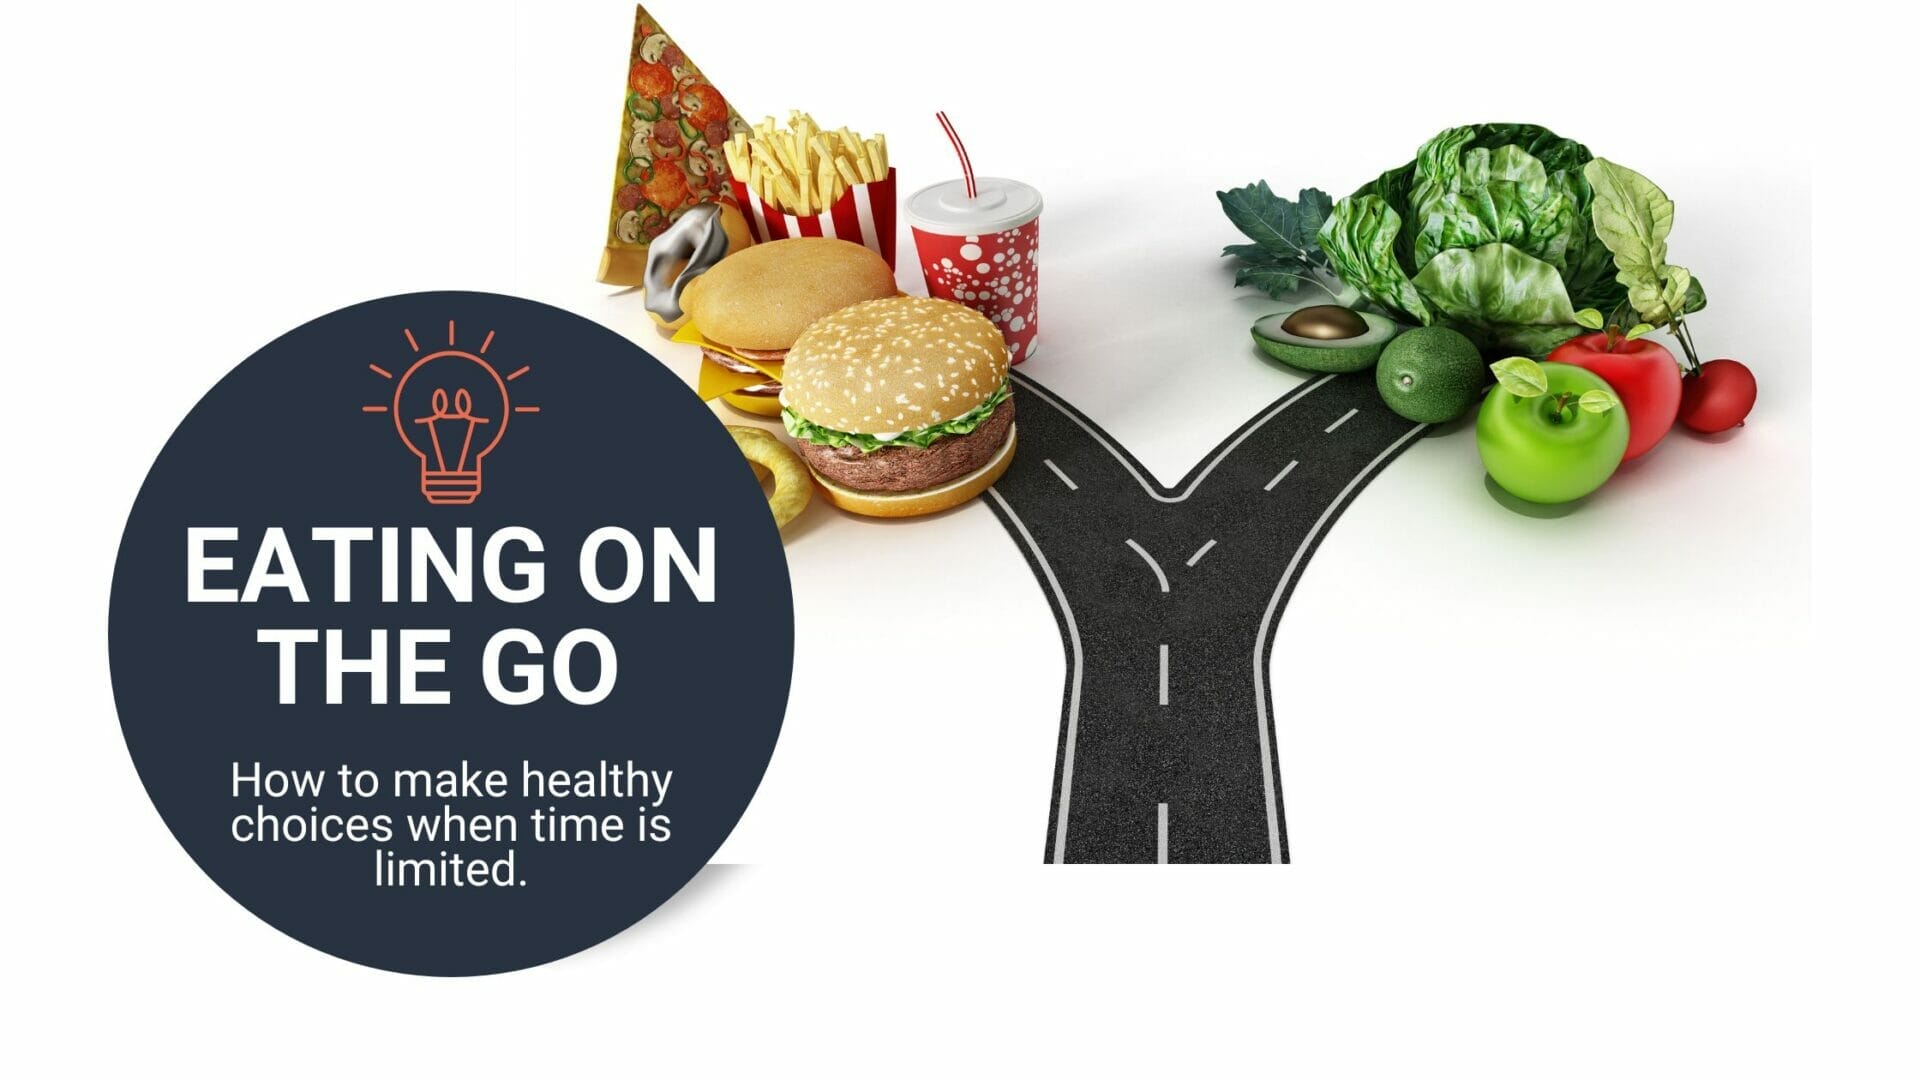 Are you always on the go and struggling to make healthy food choices? Fear not, because with a little planning and know-how, it's possible to fuel your body with the nutrients it needs to stay healthy and energized, even when time is limited. In this post, we'll share tips for making healthy choices on the go, including healthier fast food options, quick and easy meal ideas, and nutritious snacking options. Whether you're a busy adult or simply looking for portable meal ideas, we've got you covered.